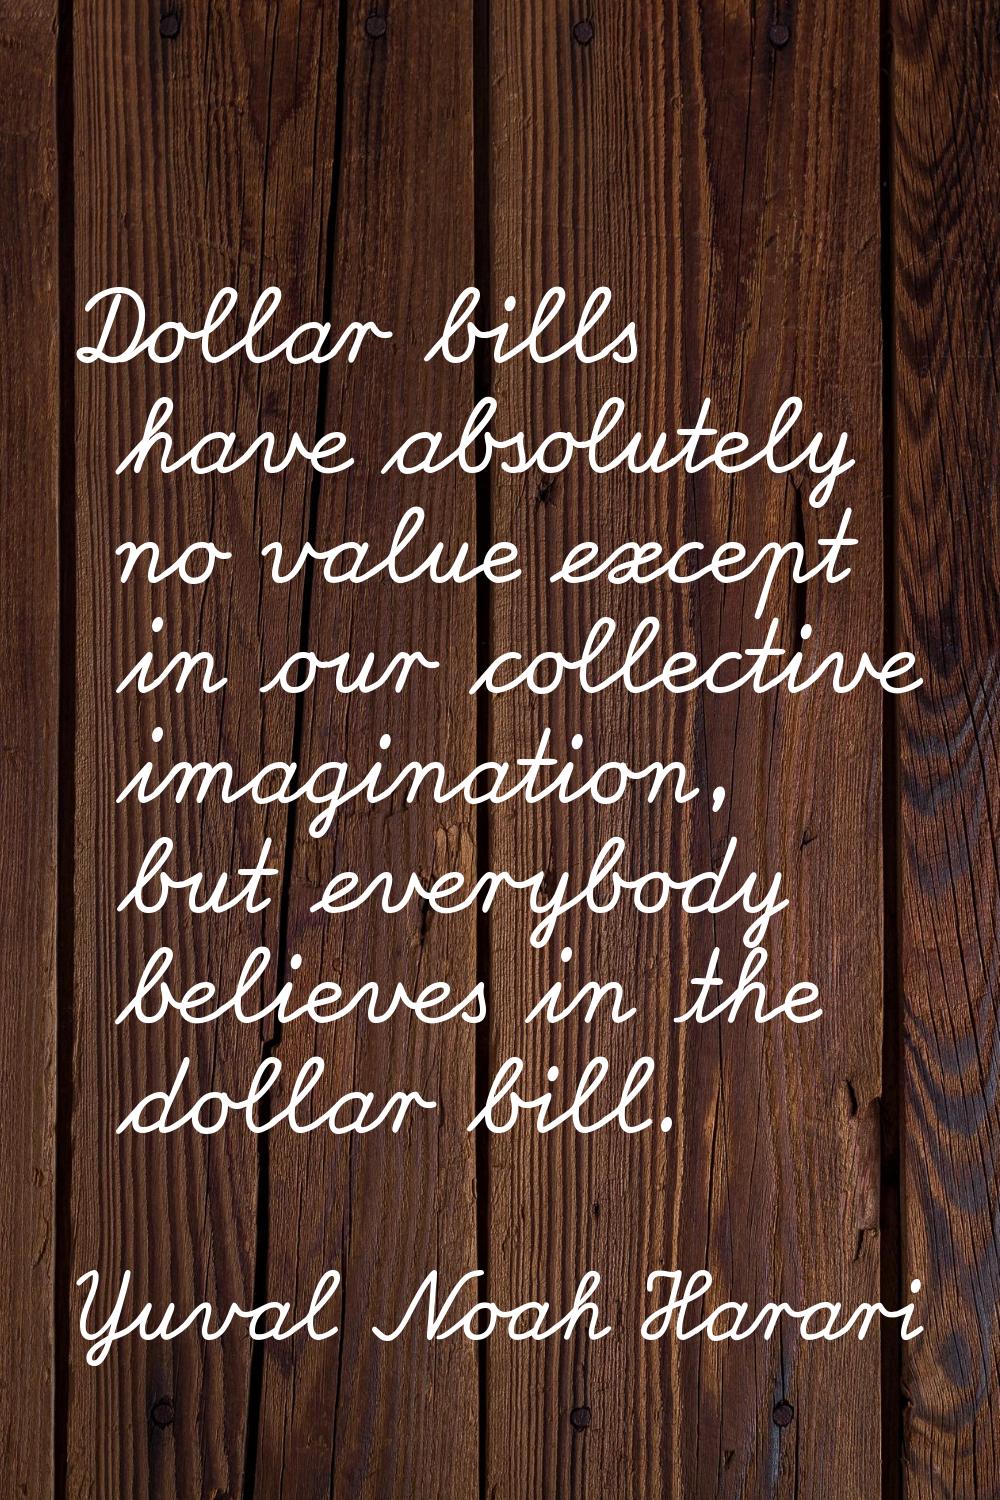 Dollar bills have absolutely no value except in our collective imagination, but everybody believes 